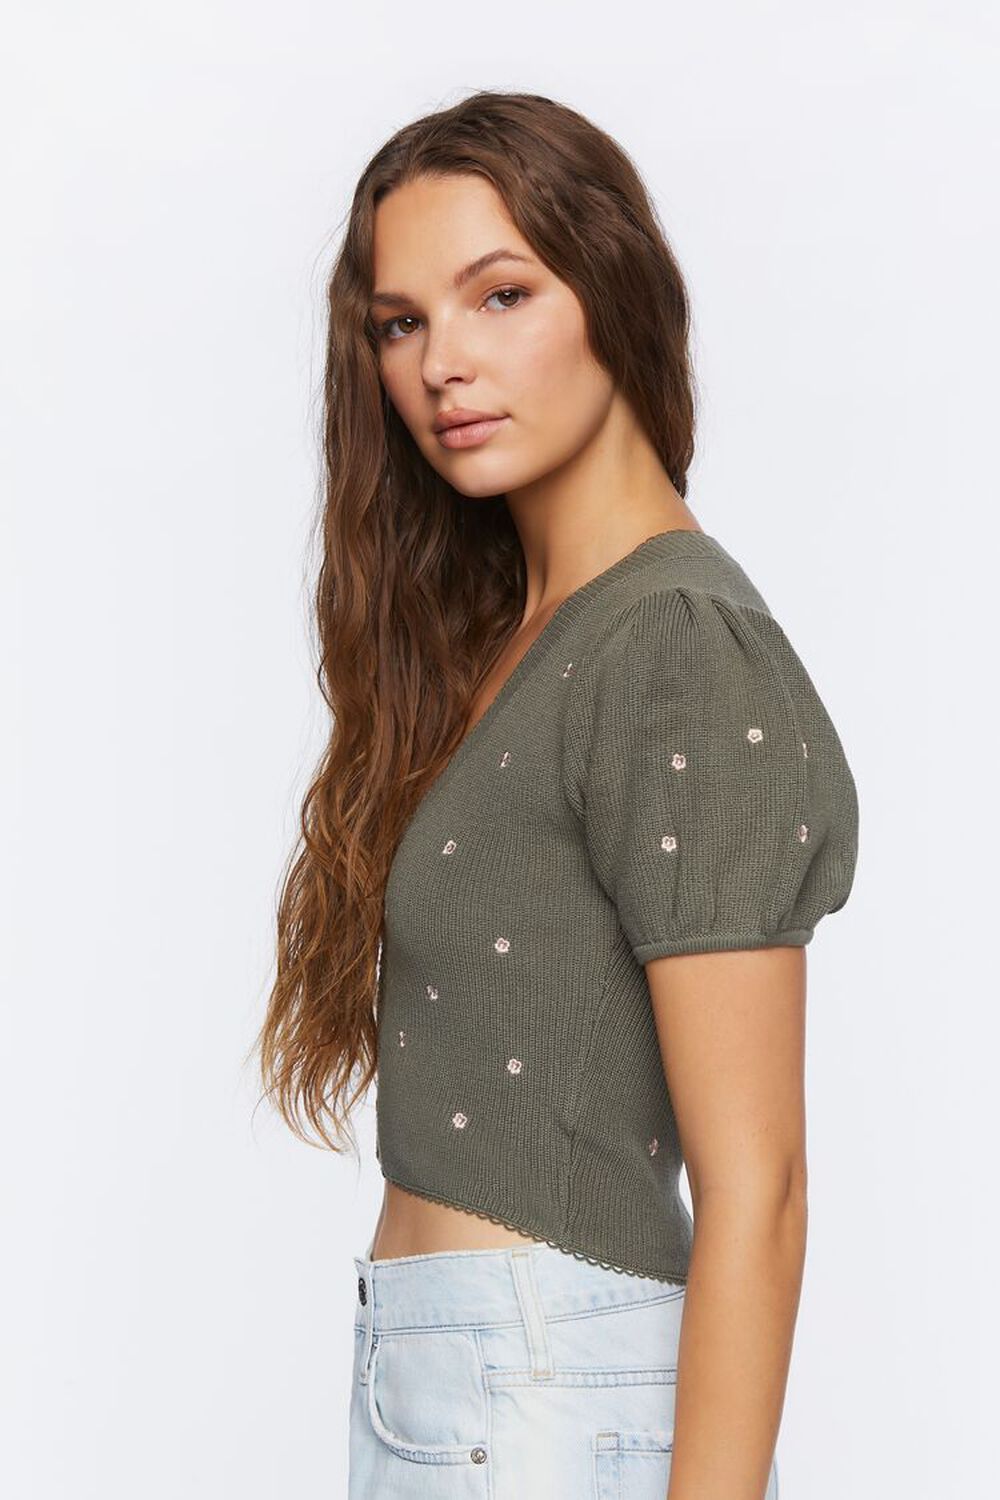 SAGE/BEIGE Sweater-Knit Floral Embroidered Top, image 3